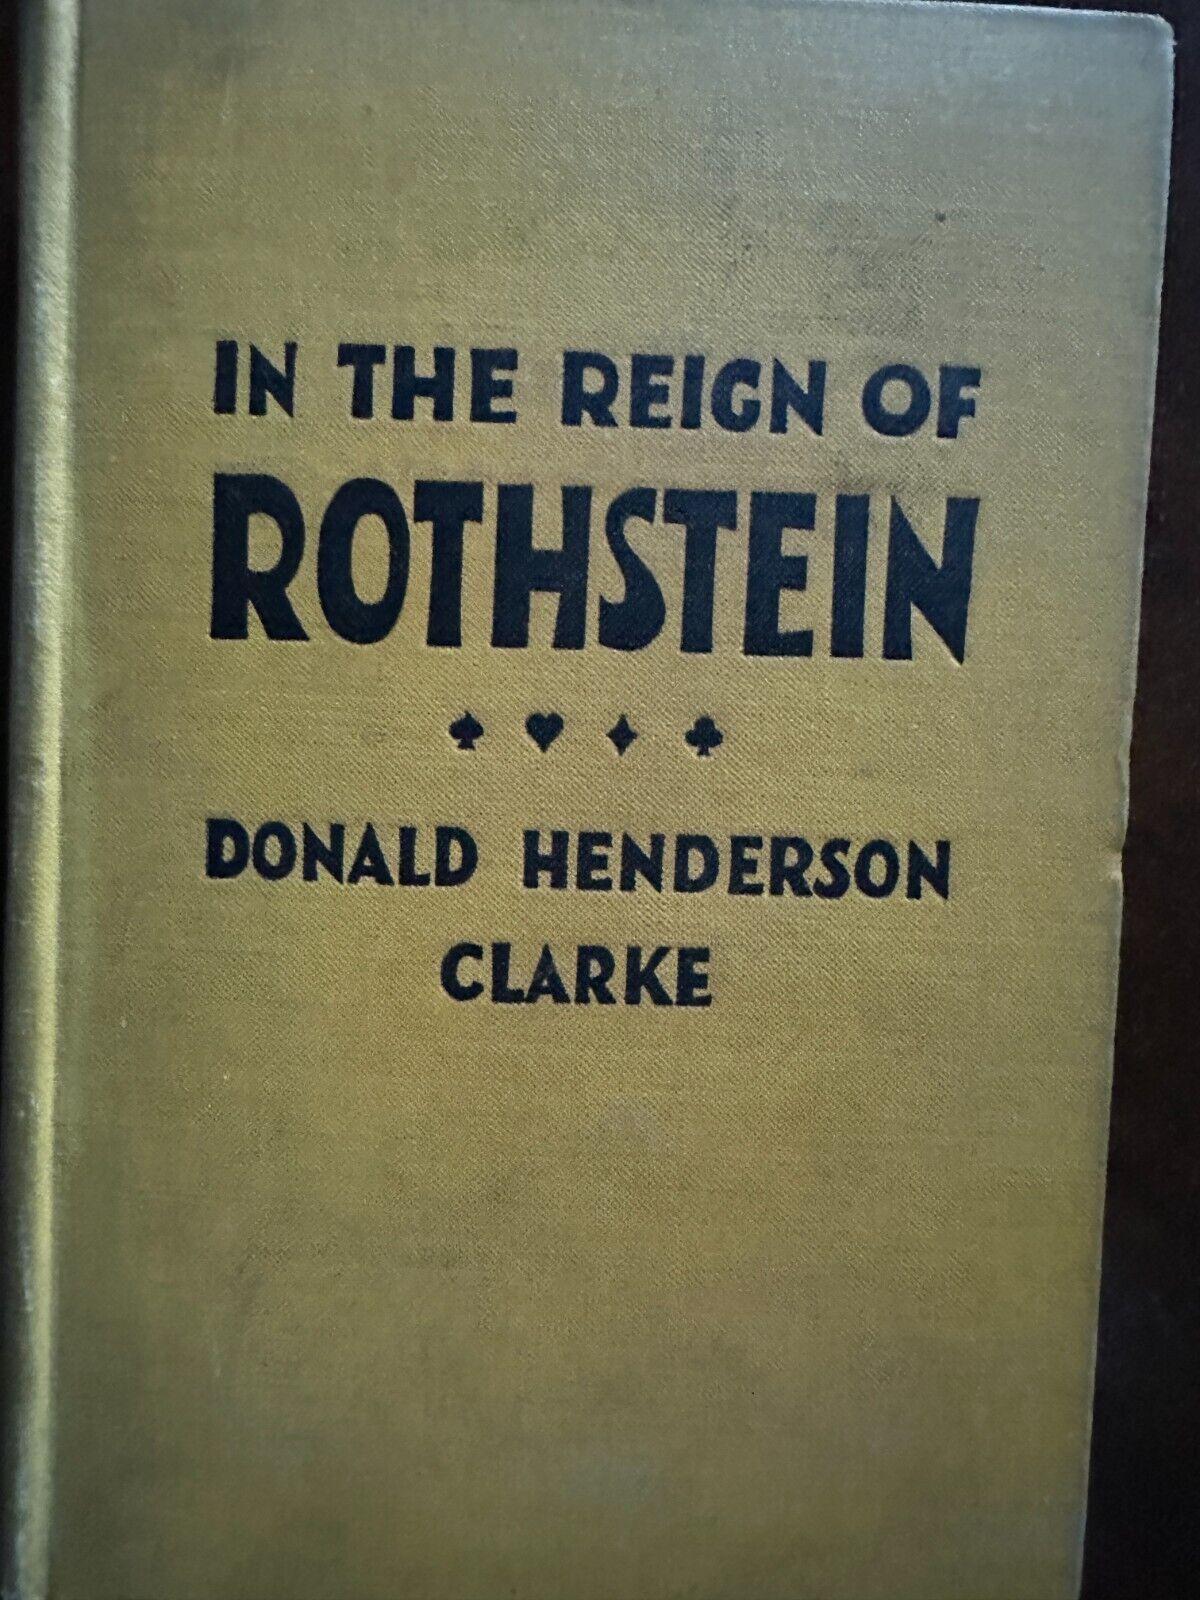 In the Reign of Rothstein by Donald Henderson Clarke 1929